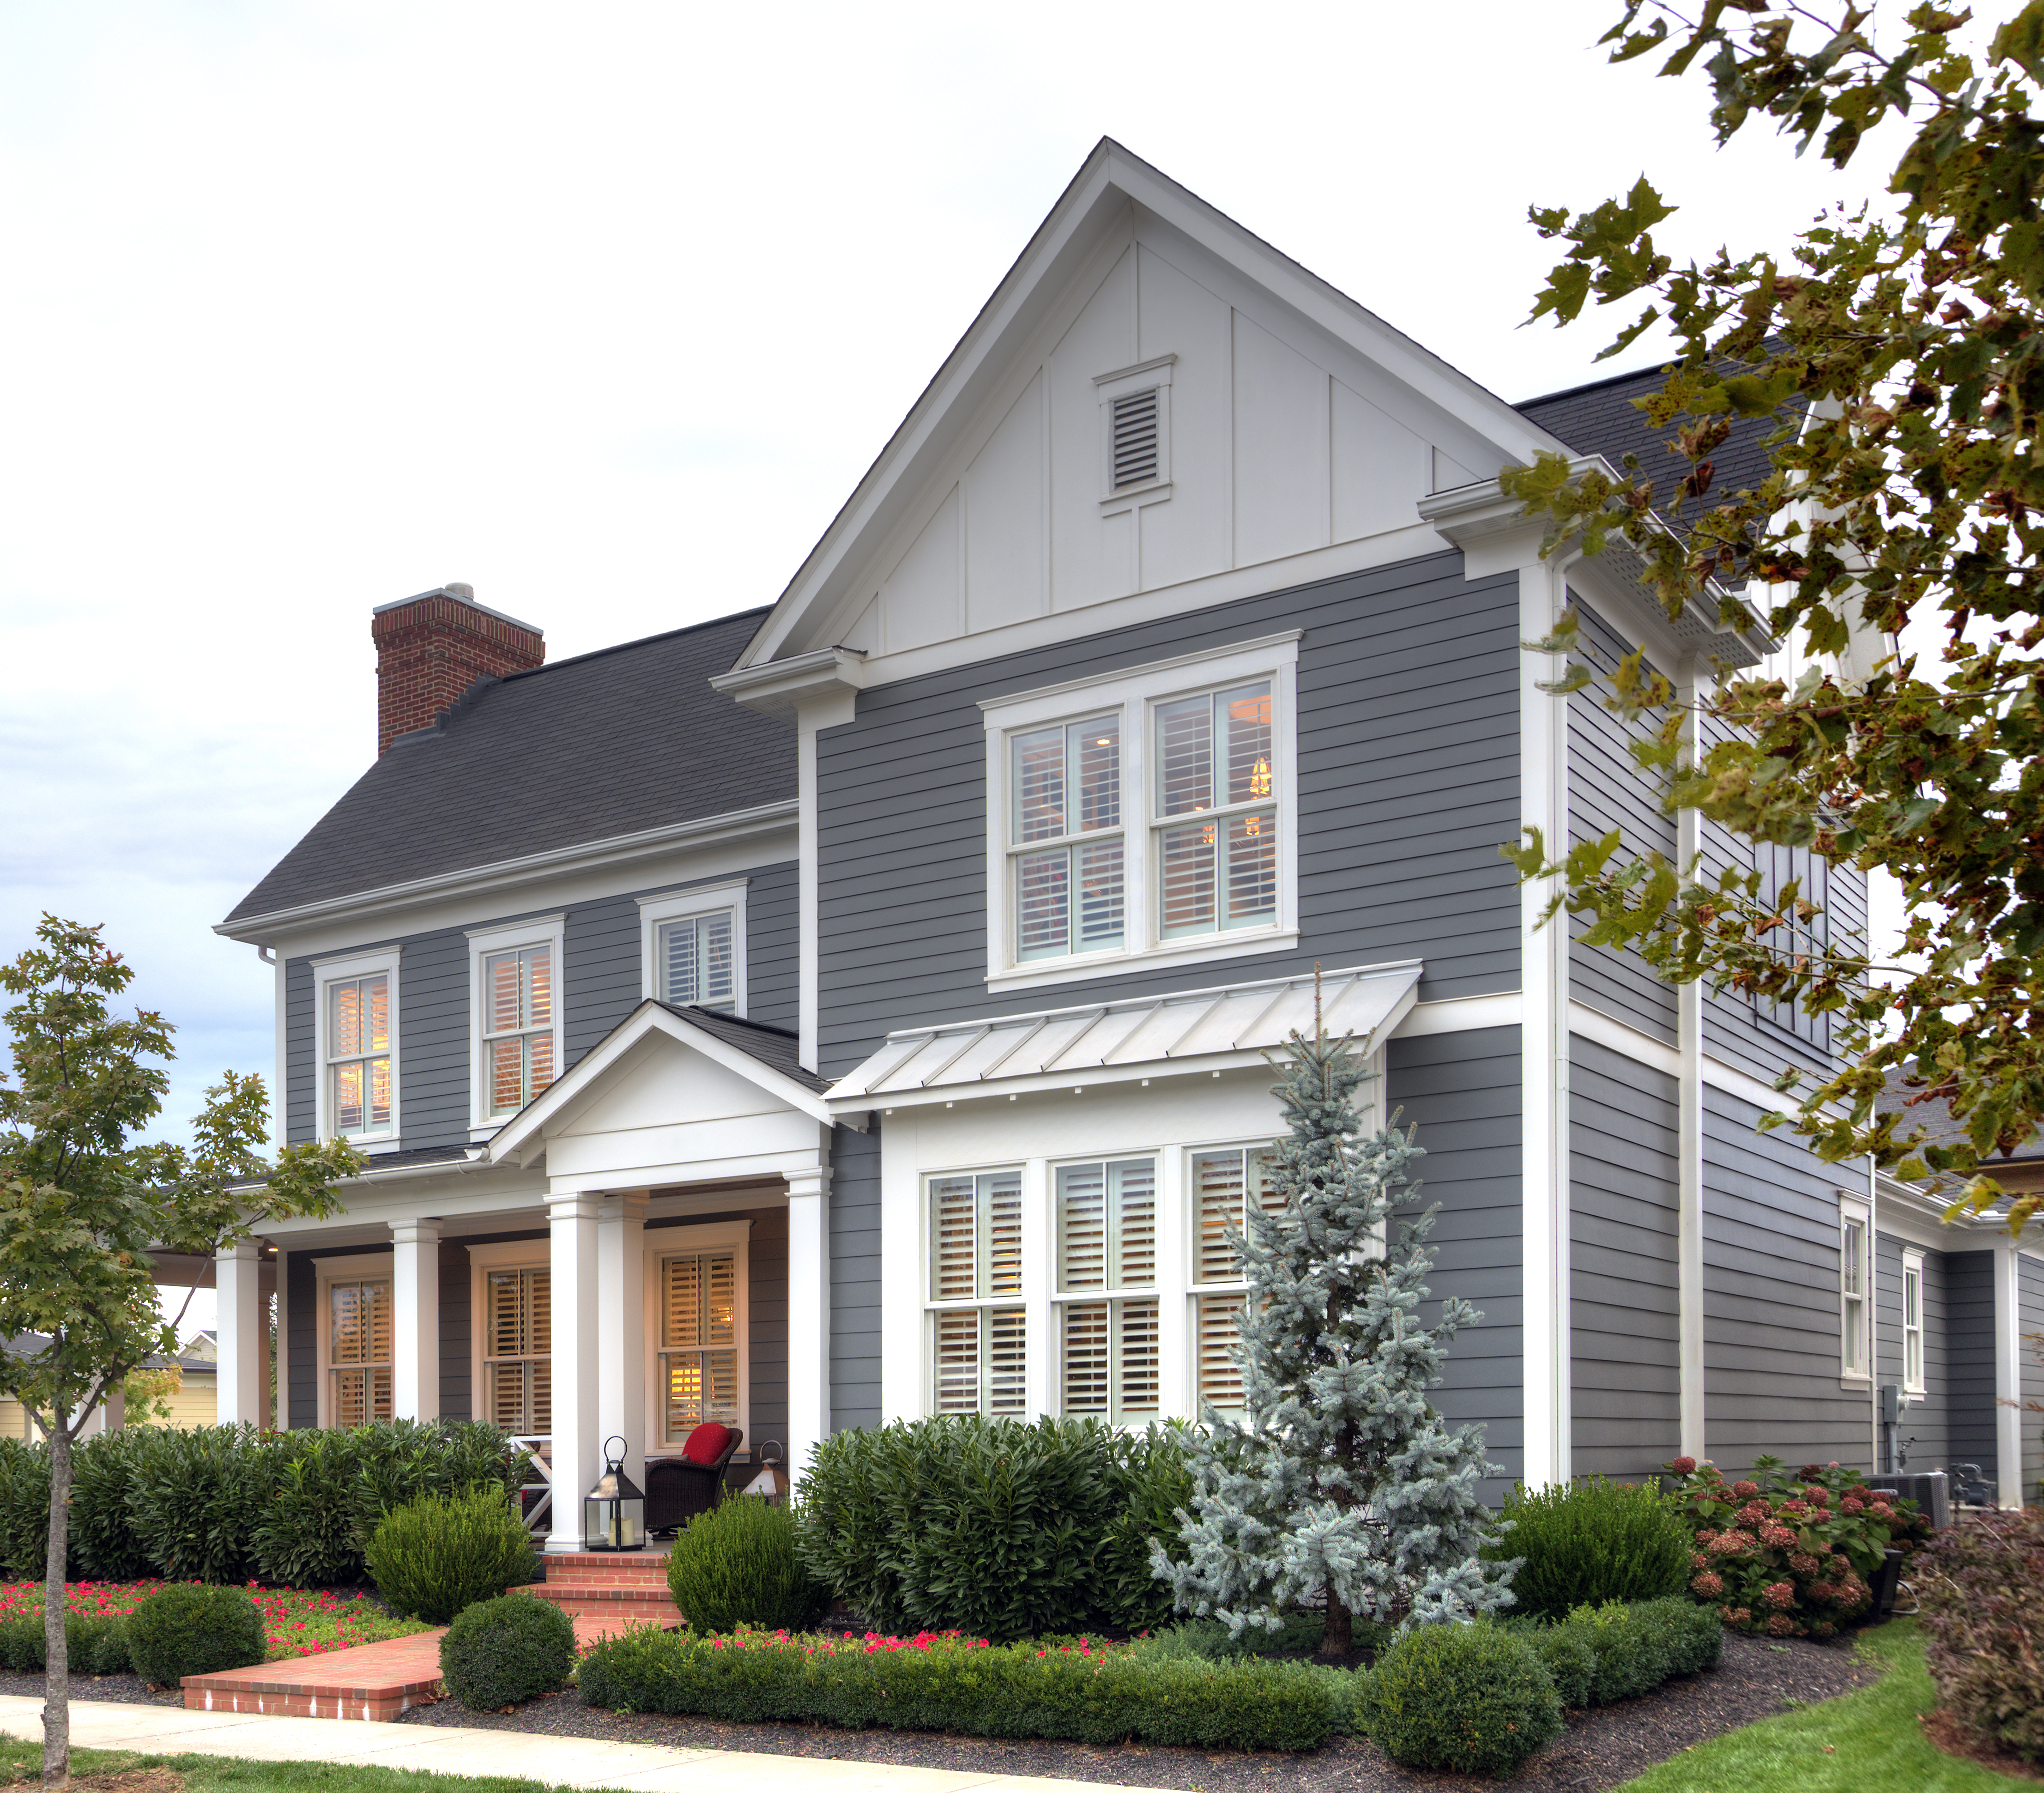 How to choose siding for your home. || Within the Grove